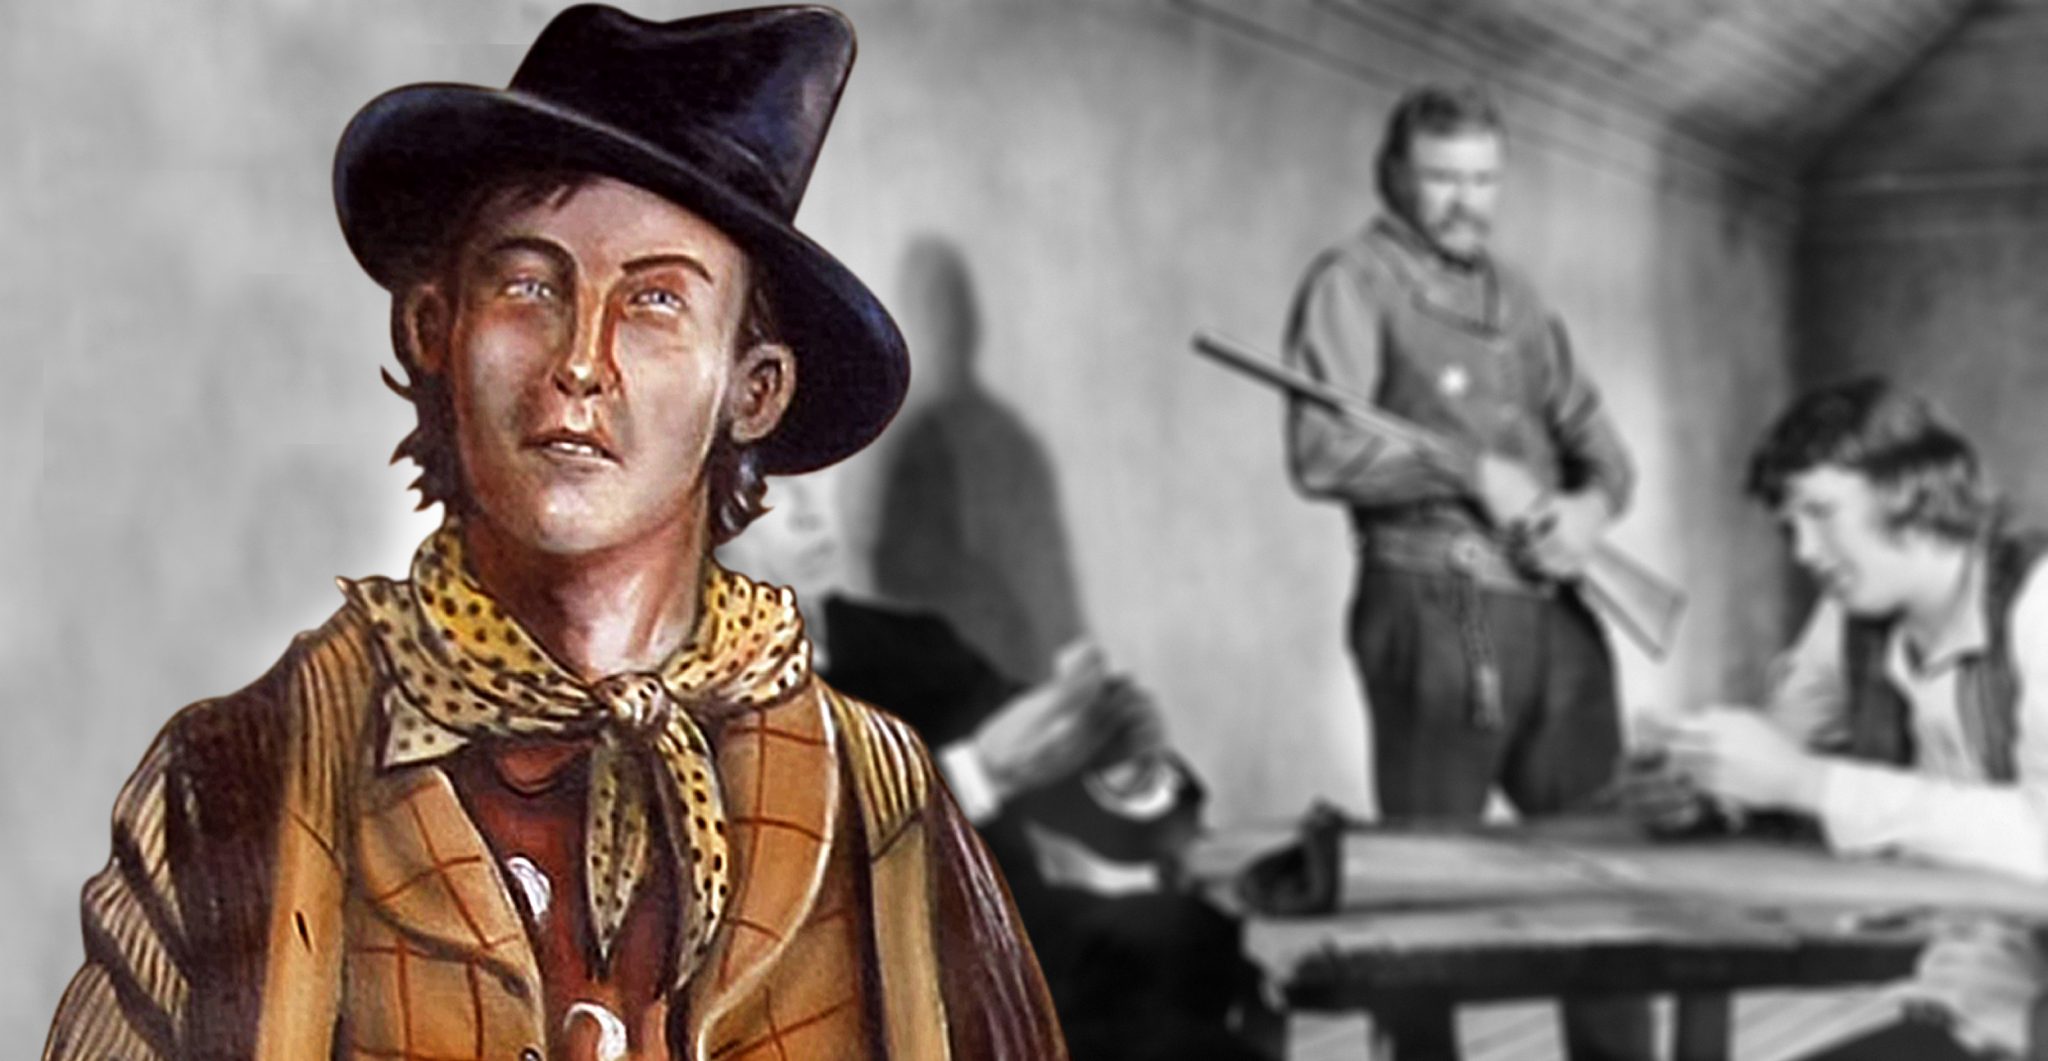 Second Confirmed Photo Of Billy The Kid Unearthed Set For Huge Auction